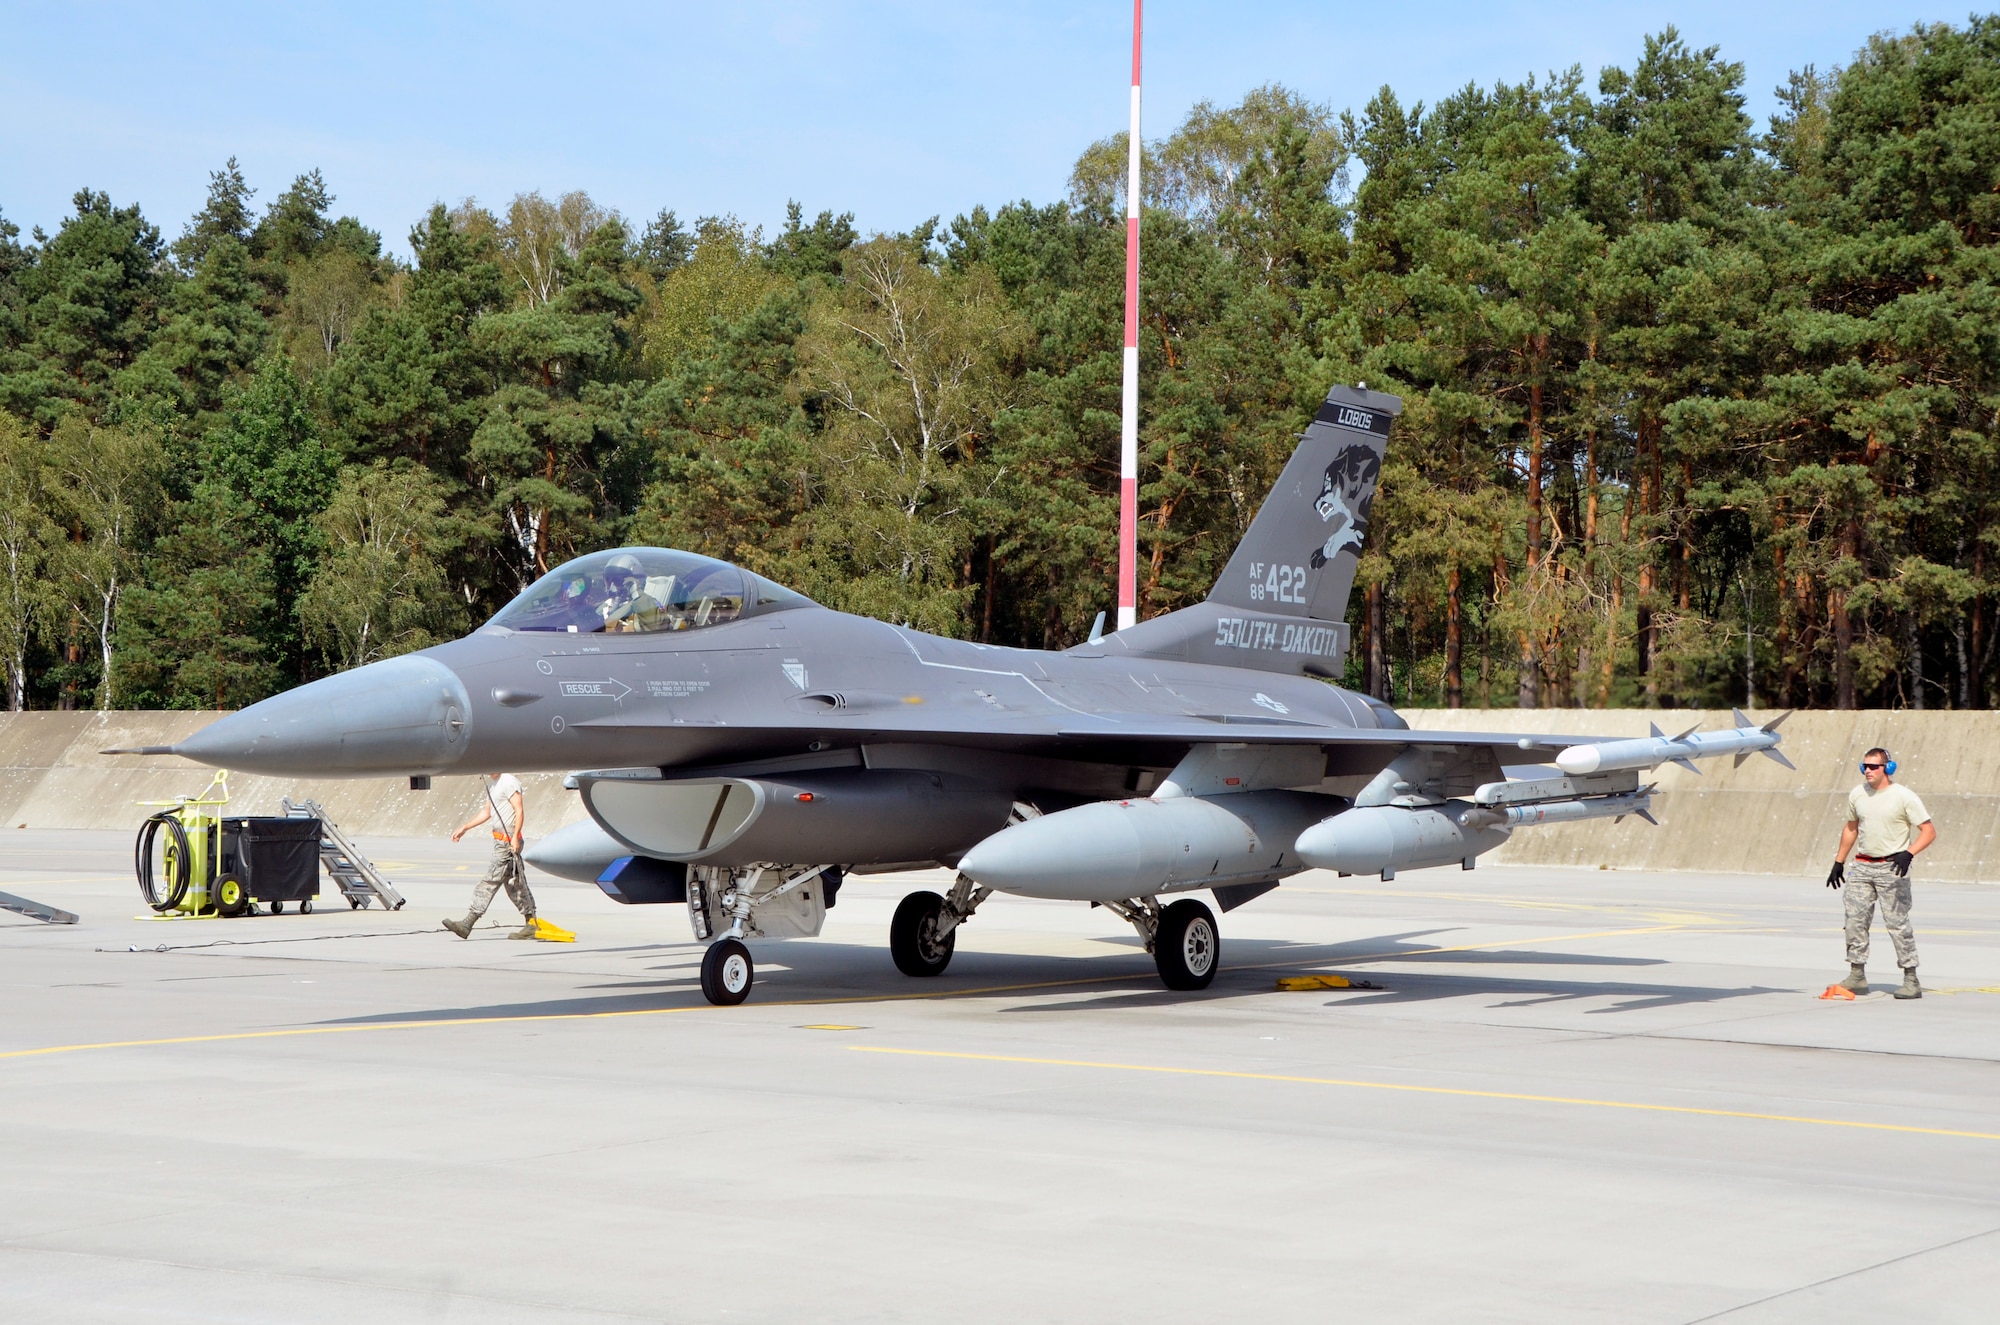 Lask Air Base, Poland -- An F-16 Fighting Falcon from the South Dakota Air National Guard, 114th Fighter Wing parks at Lask Air Base, Sept. 3. More than 100 members of the unit are deployed in support of Aviation Detachment 16-4, a bilateral training exercise between the U.S. and Polish forces. (U.S. Air National Guard photo by Capt. Amy Rittberger/Released)